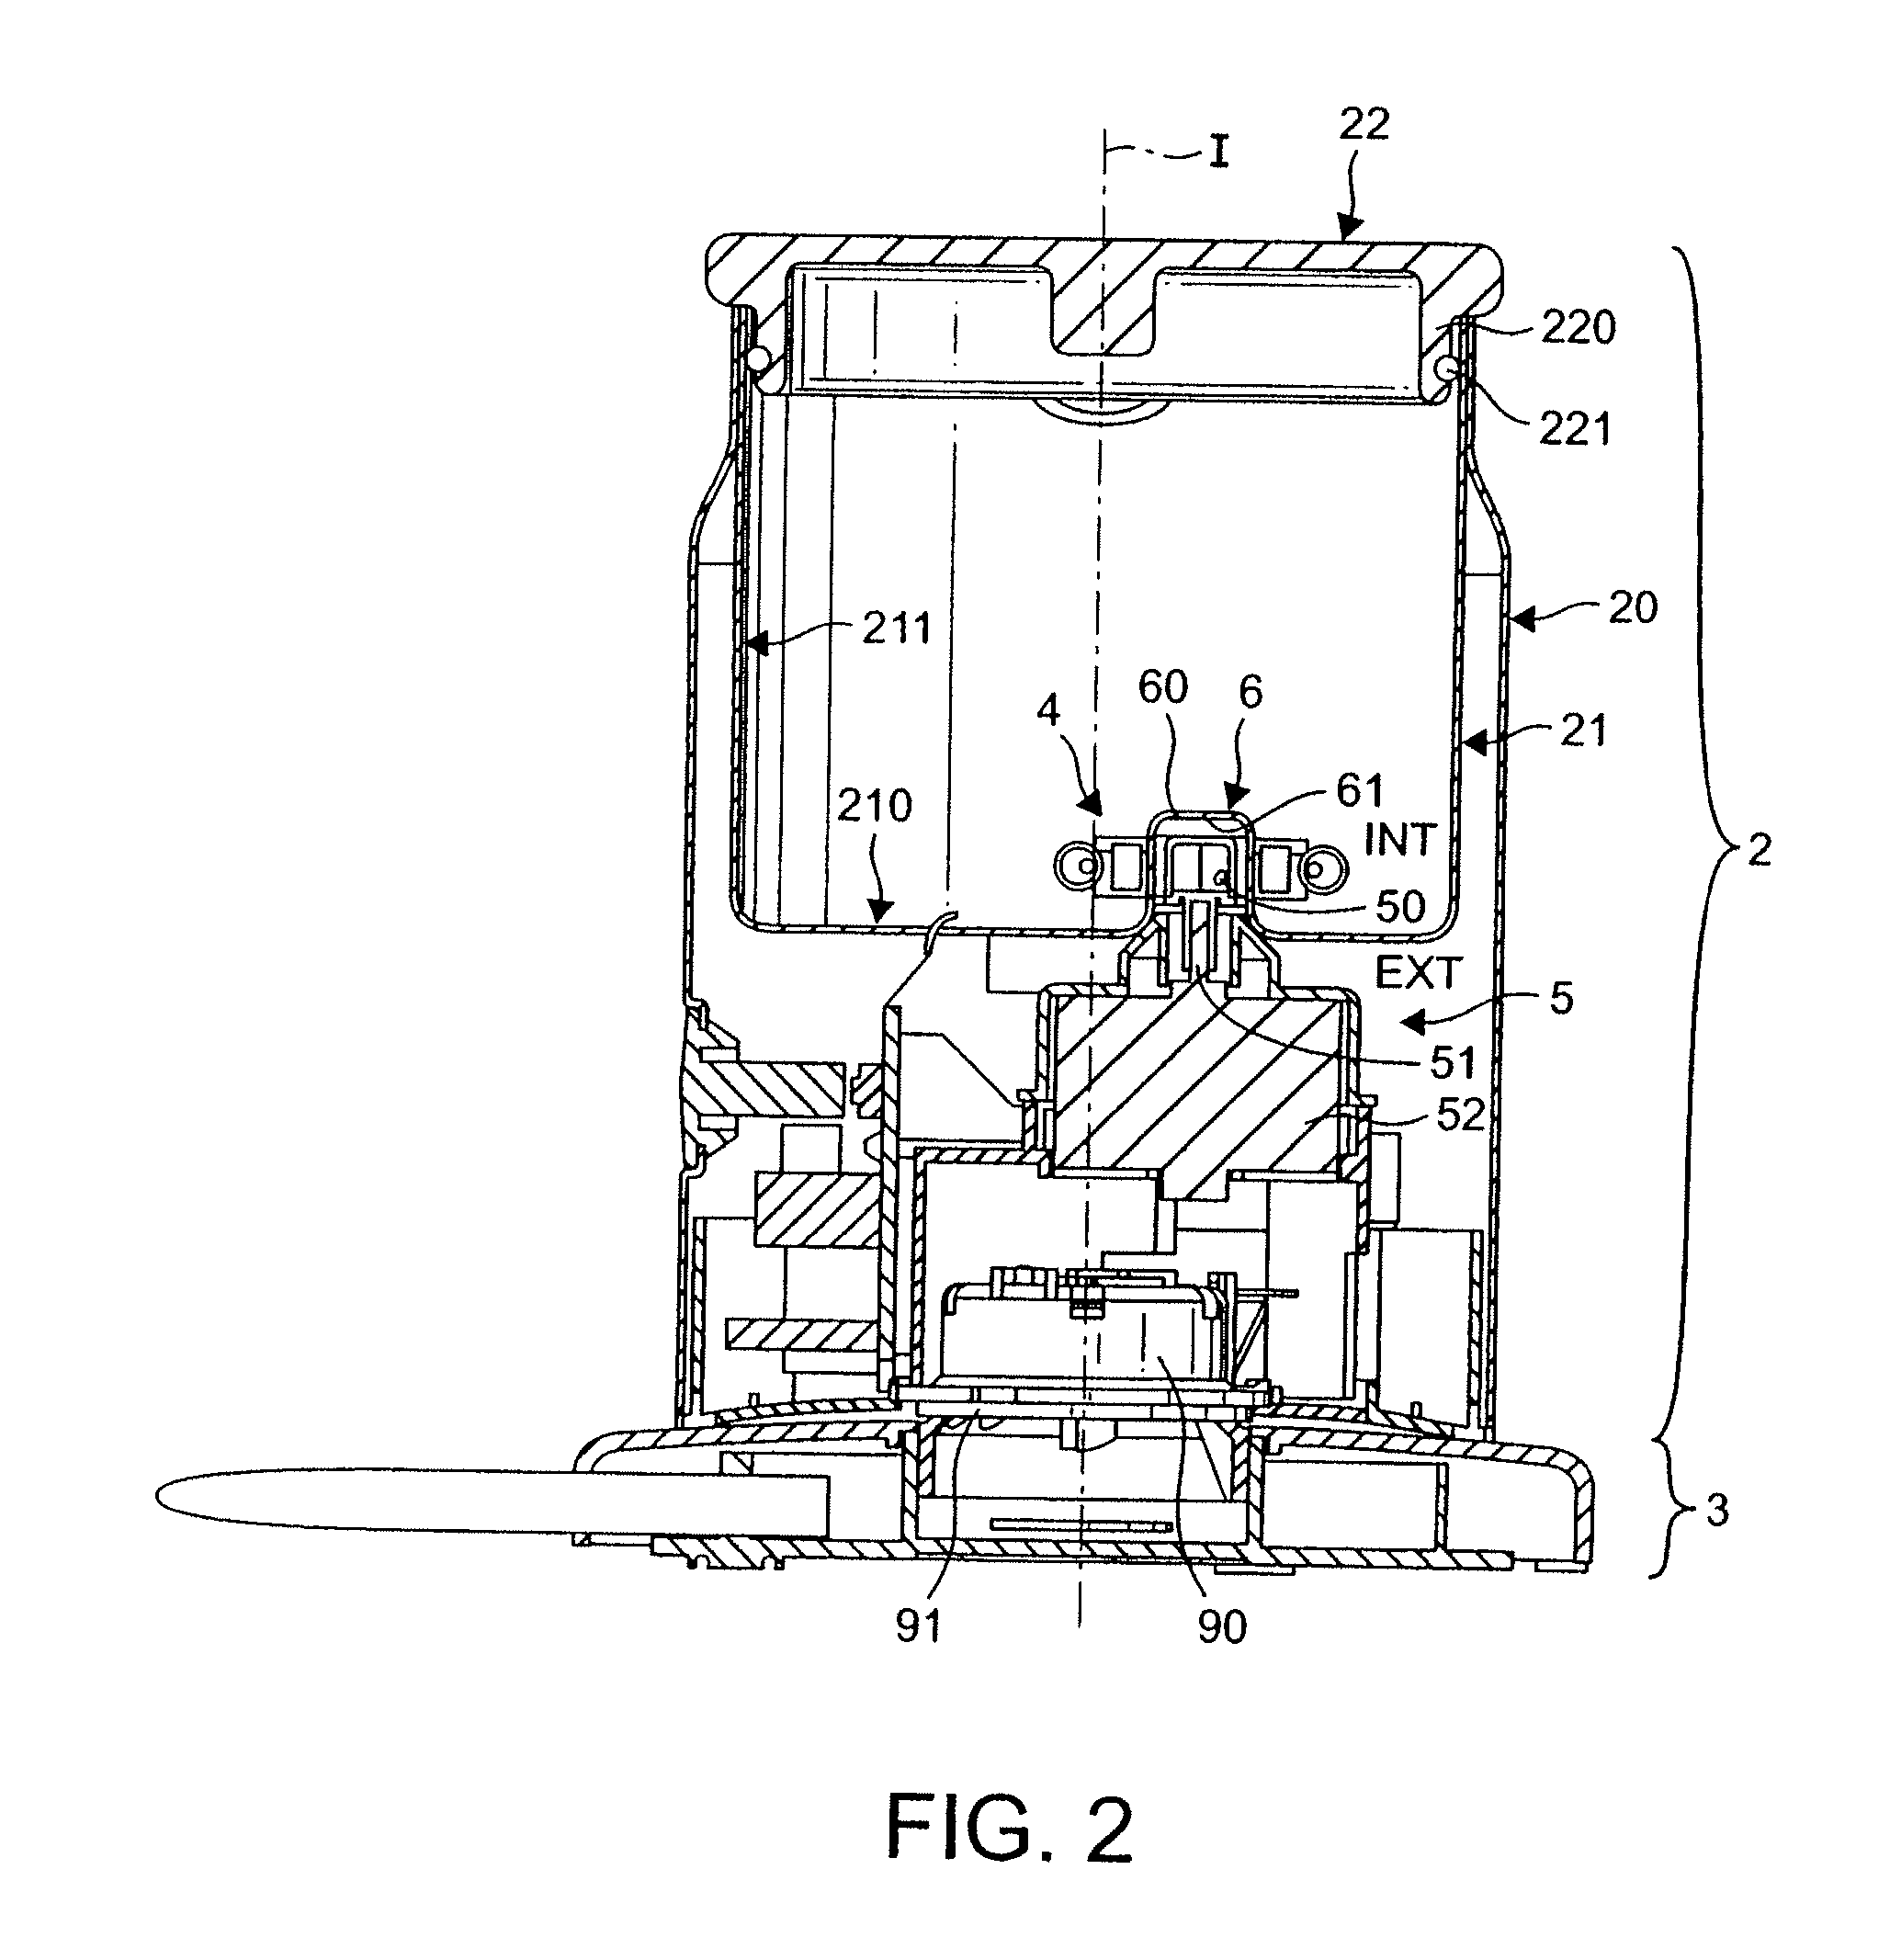 Appliance and method for preparing a froth from a food liquid